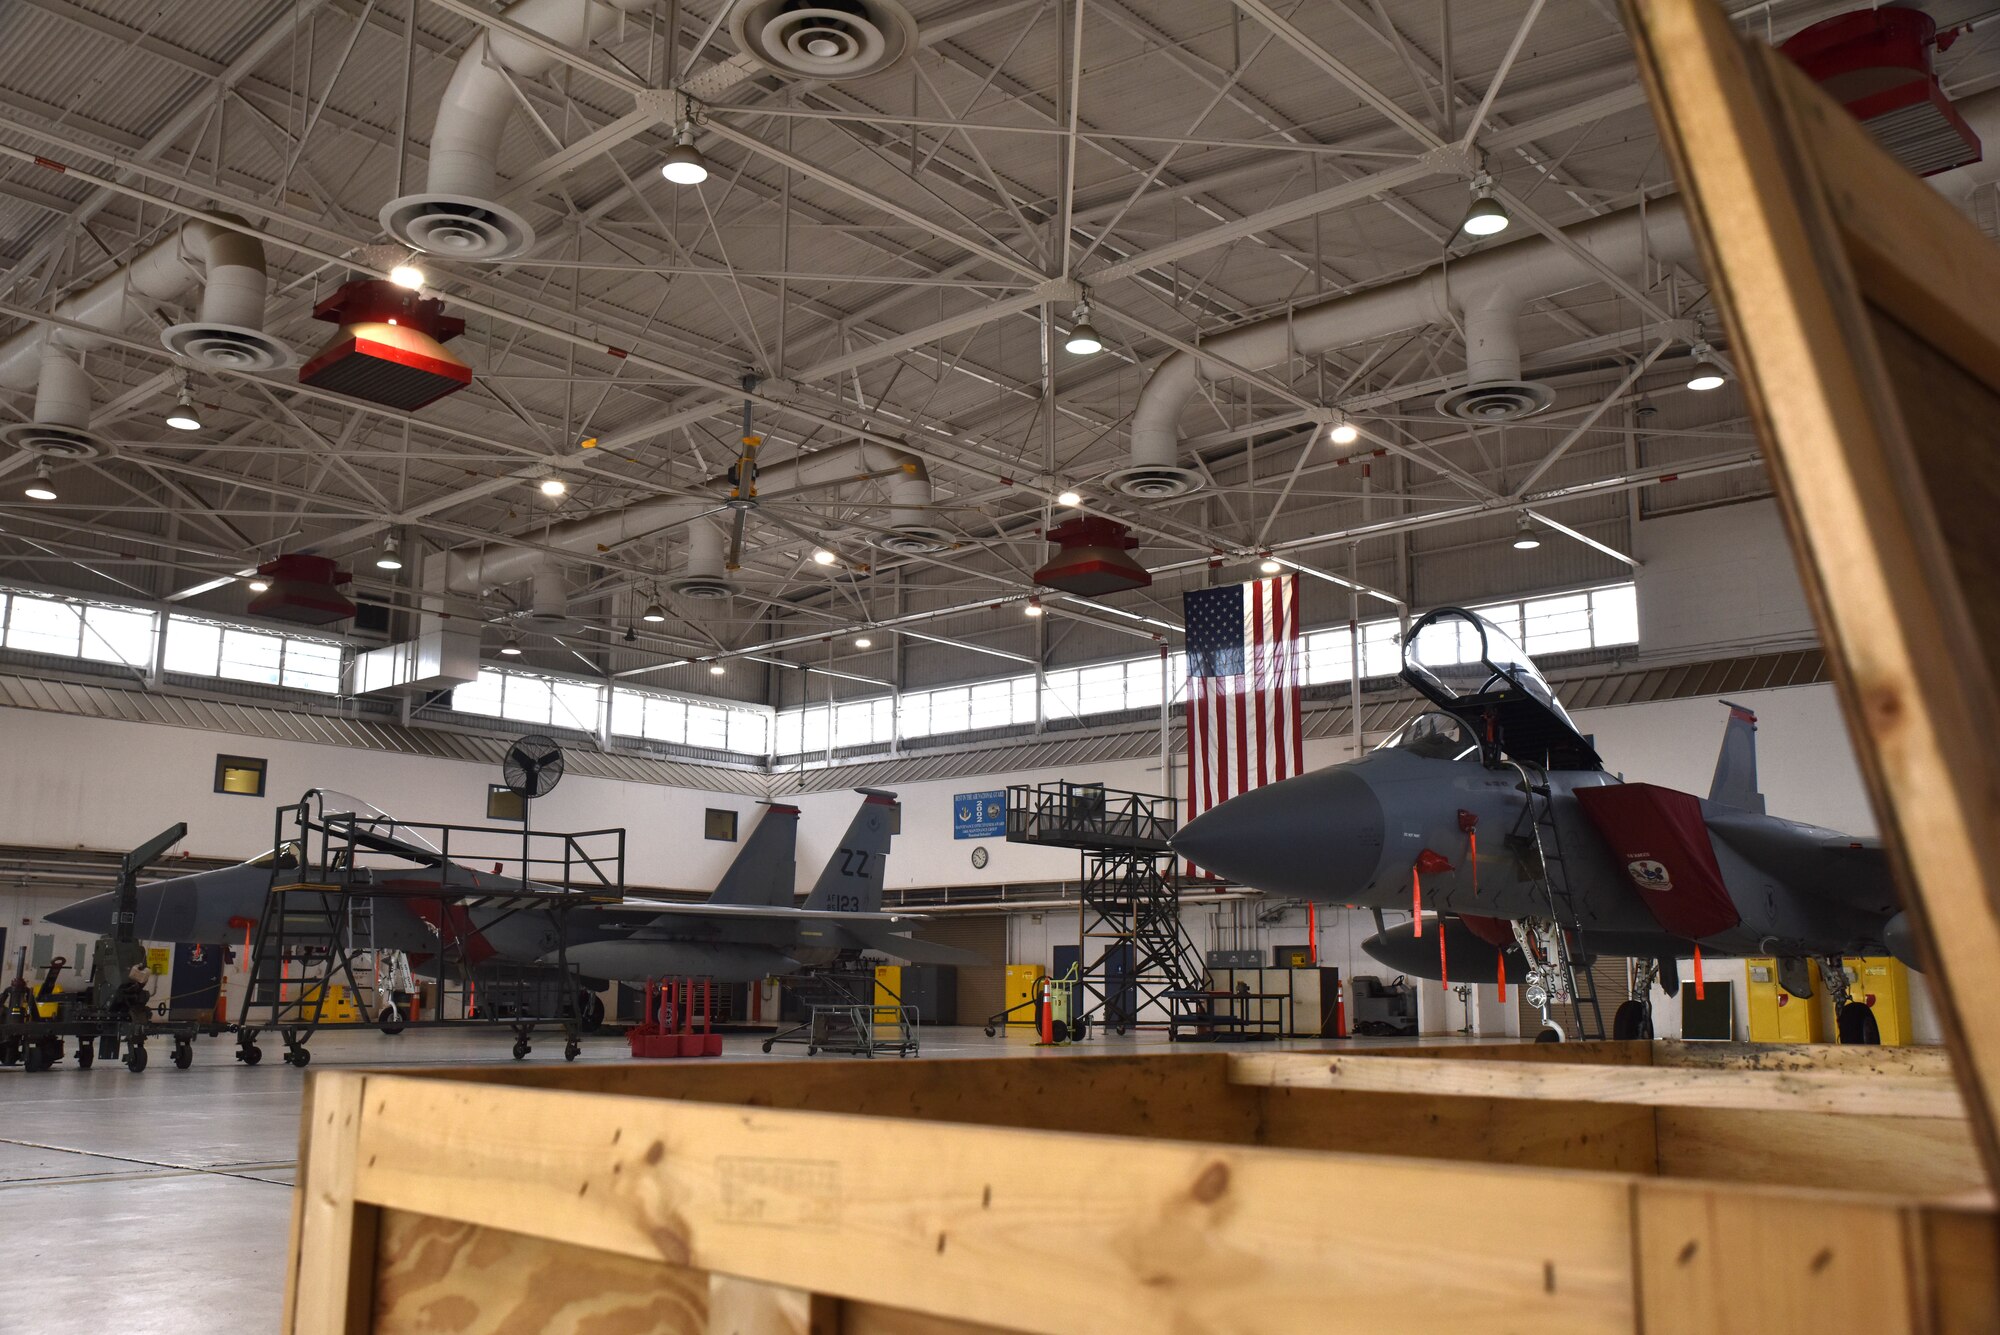 Two fighter jets sit in an aircraft hanger behind a box